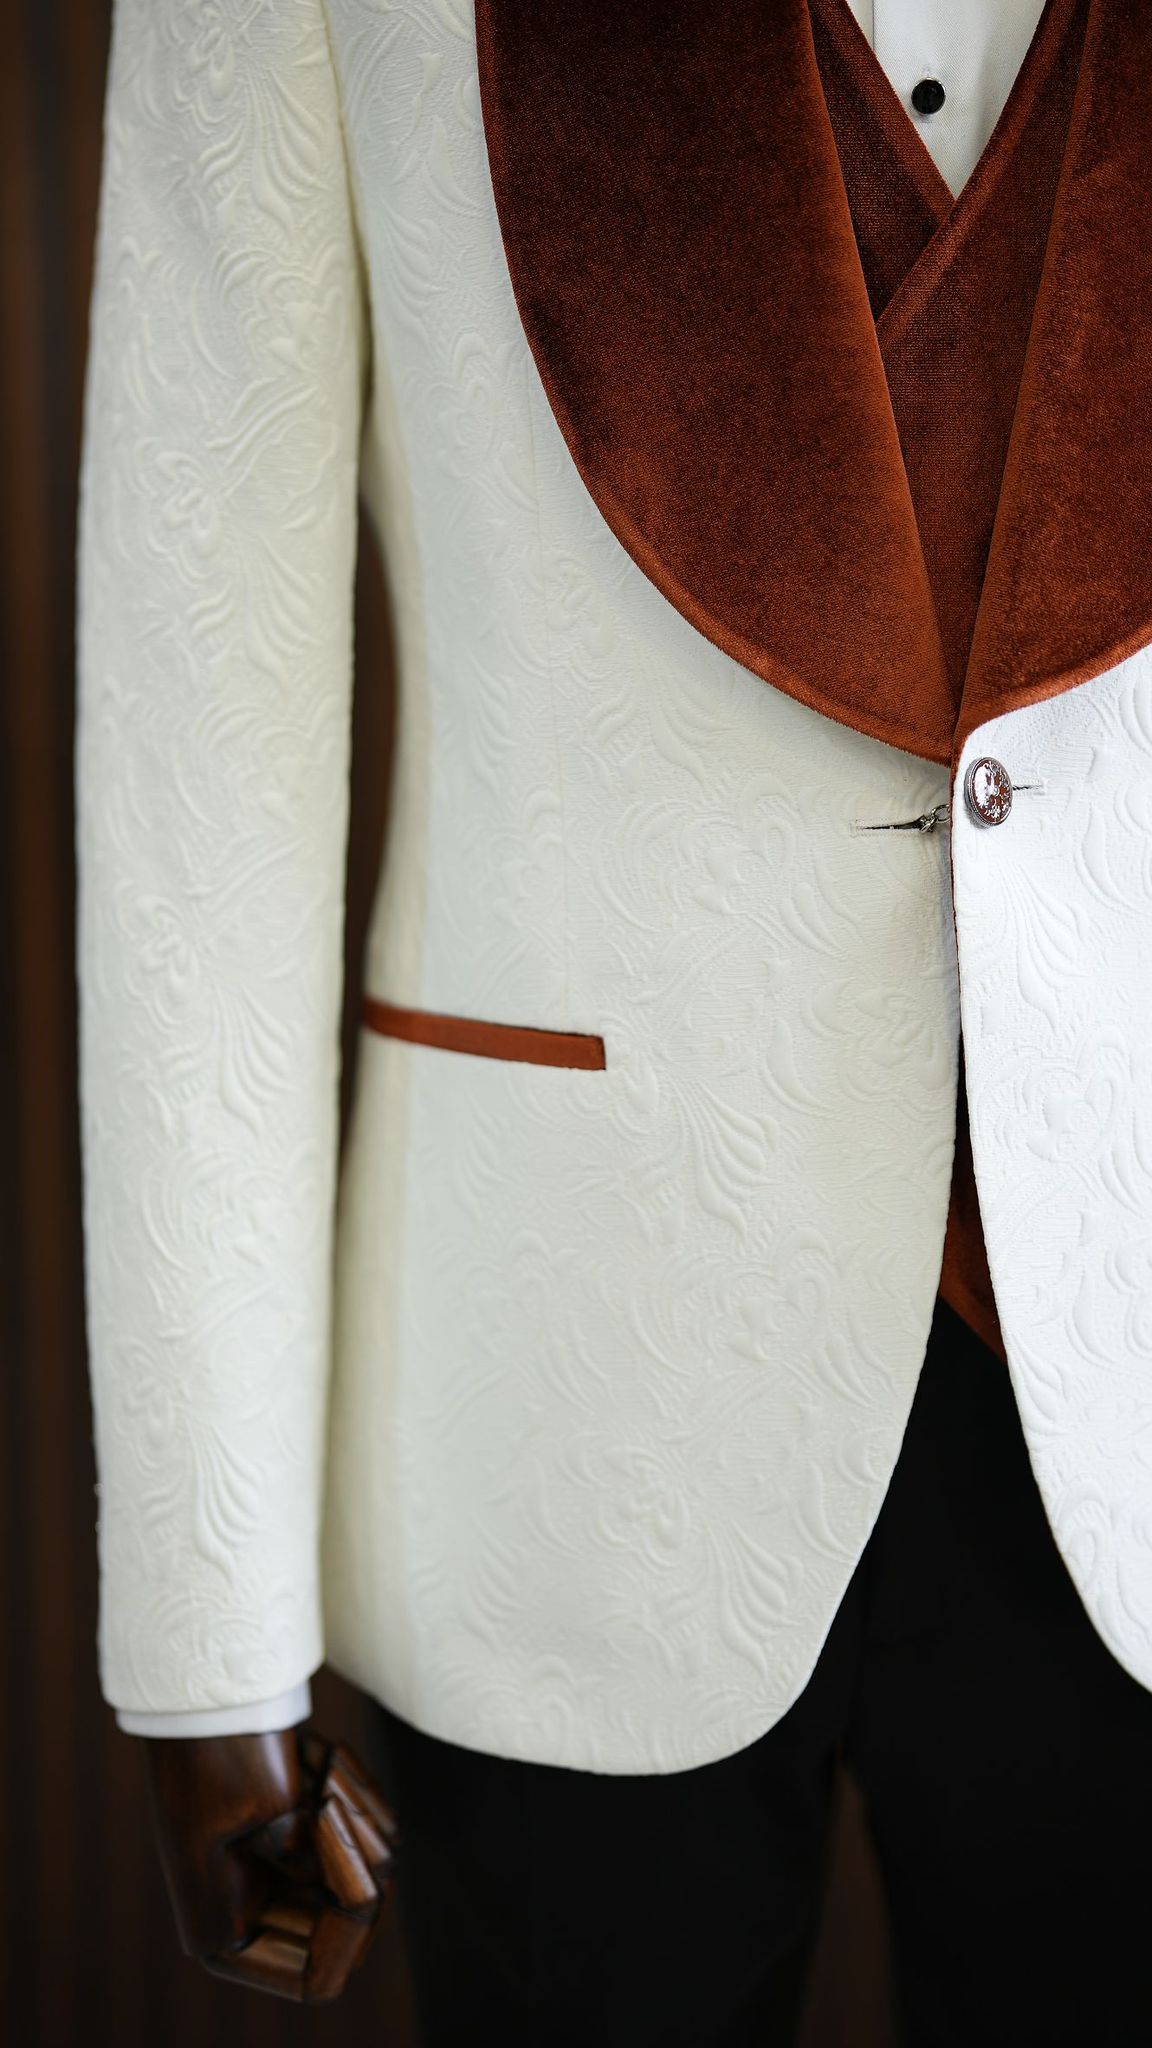 A Brown and White Tuxedo Suit on display.